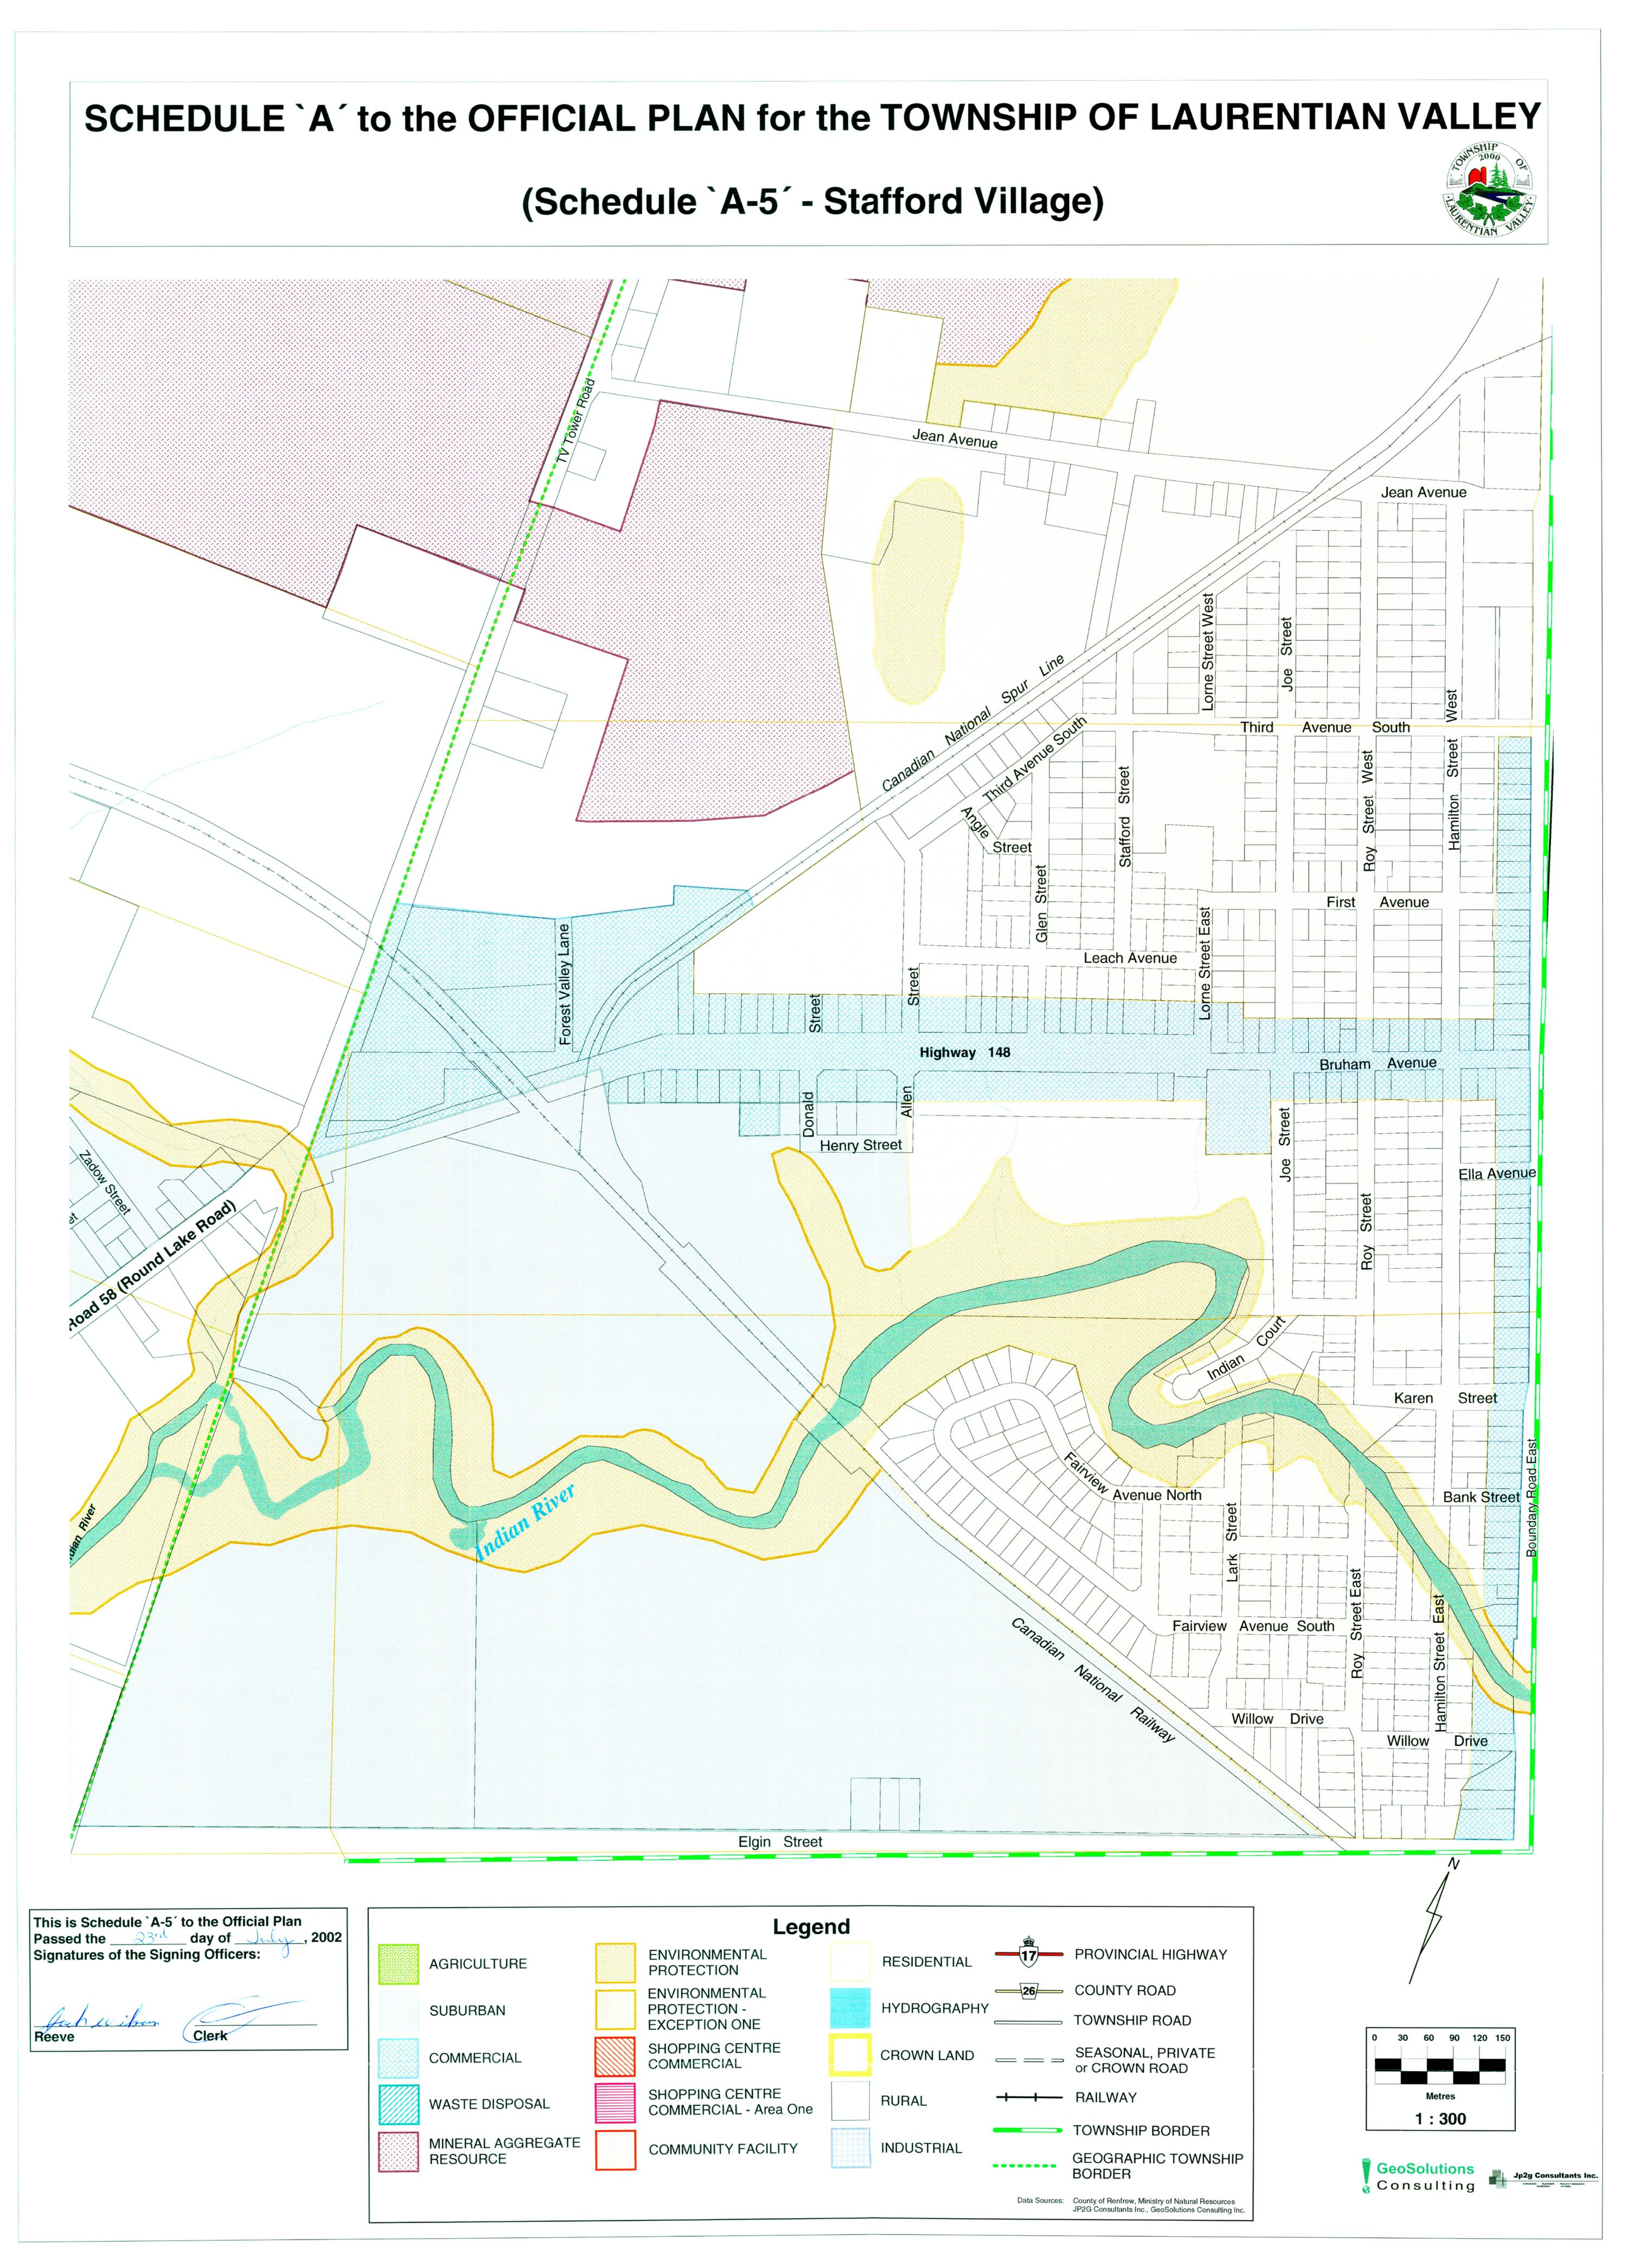 A map of schedule A to the Official Plan for the Township of Laurentian Valley - Stafford Village.